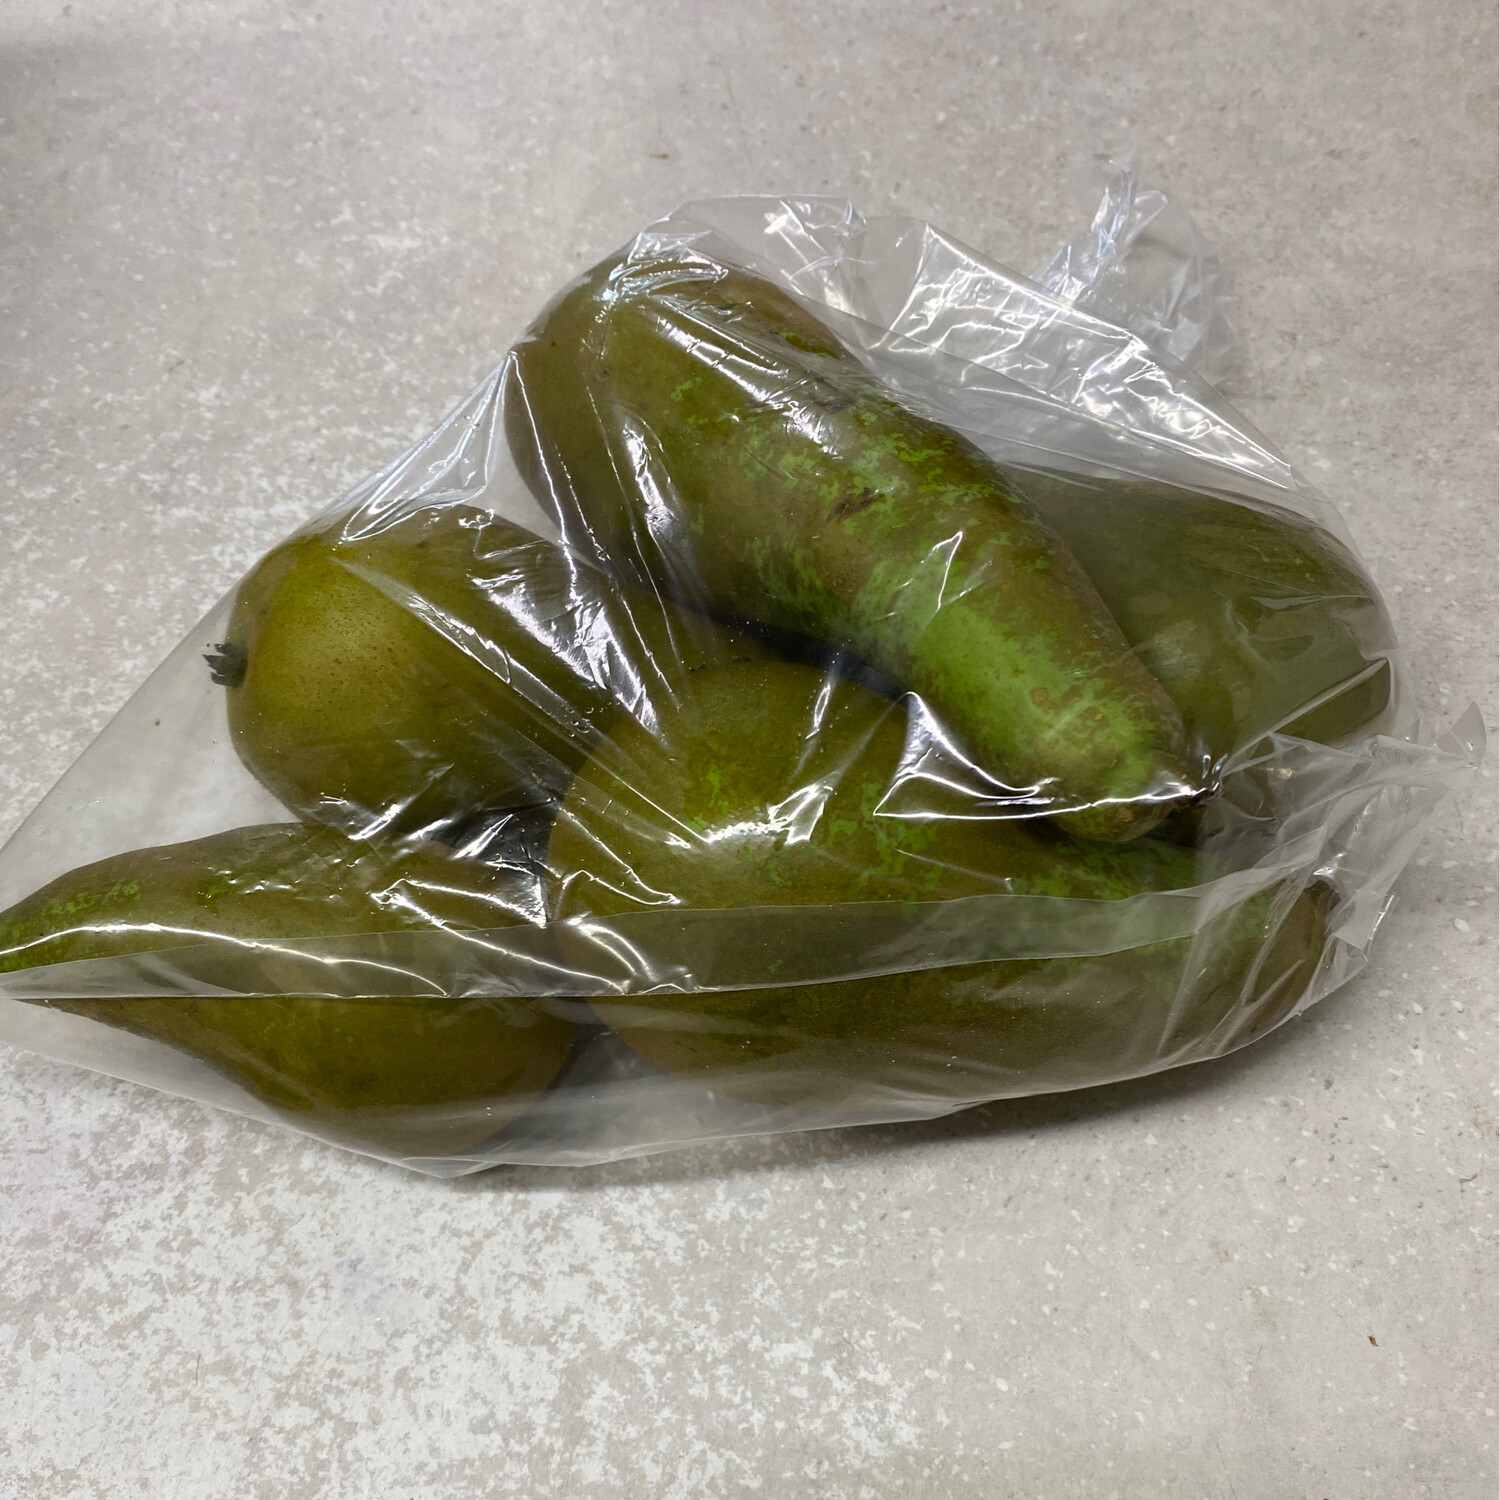 English Conference Pears Bag x 5